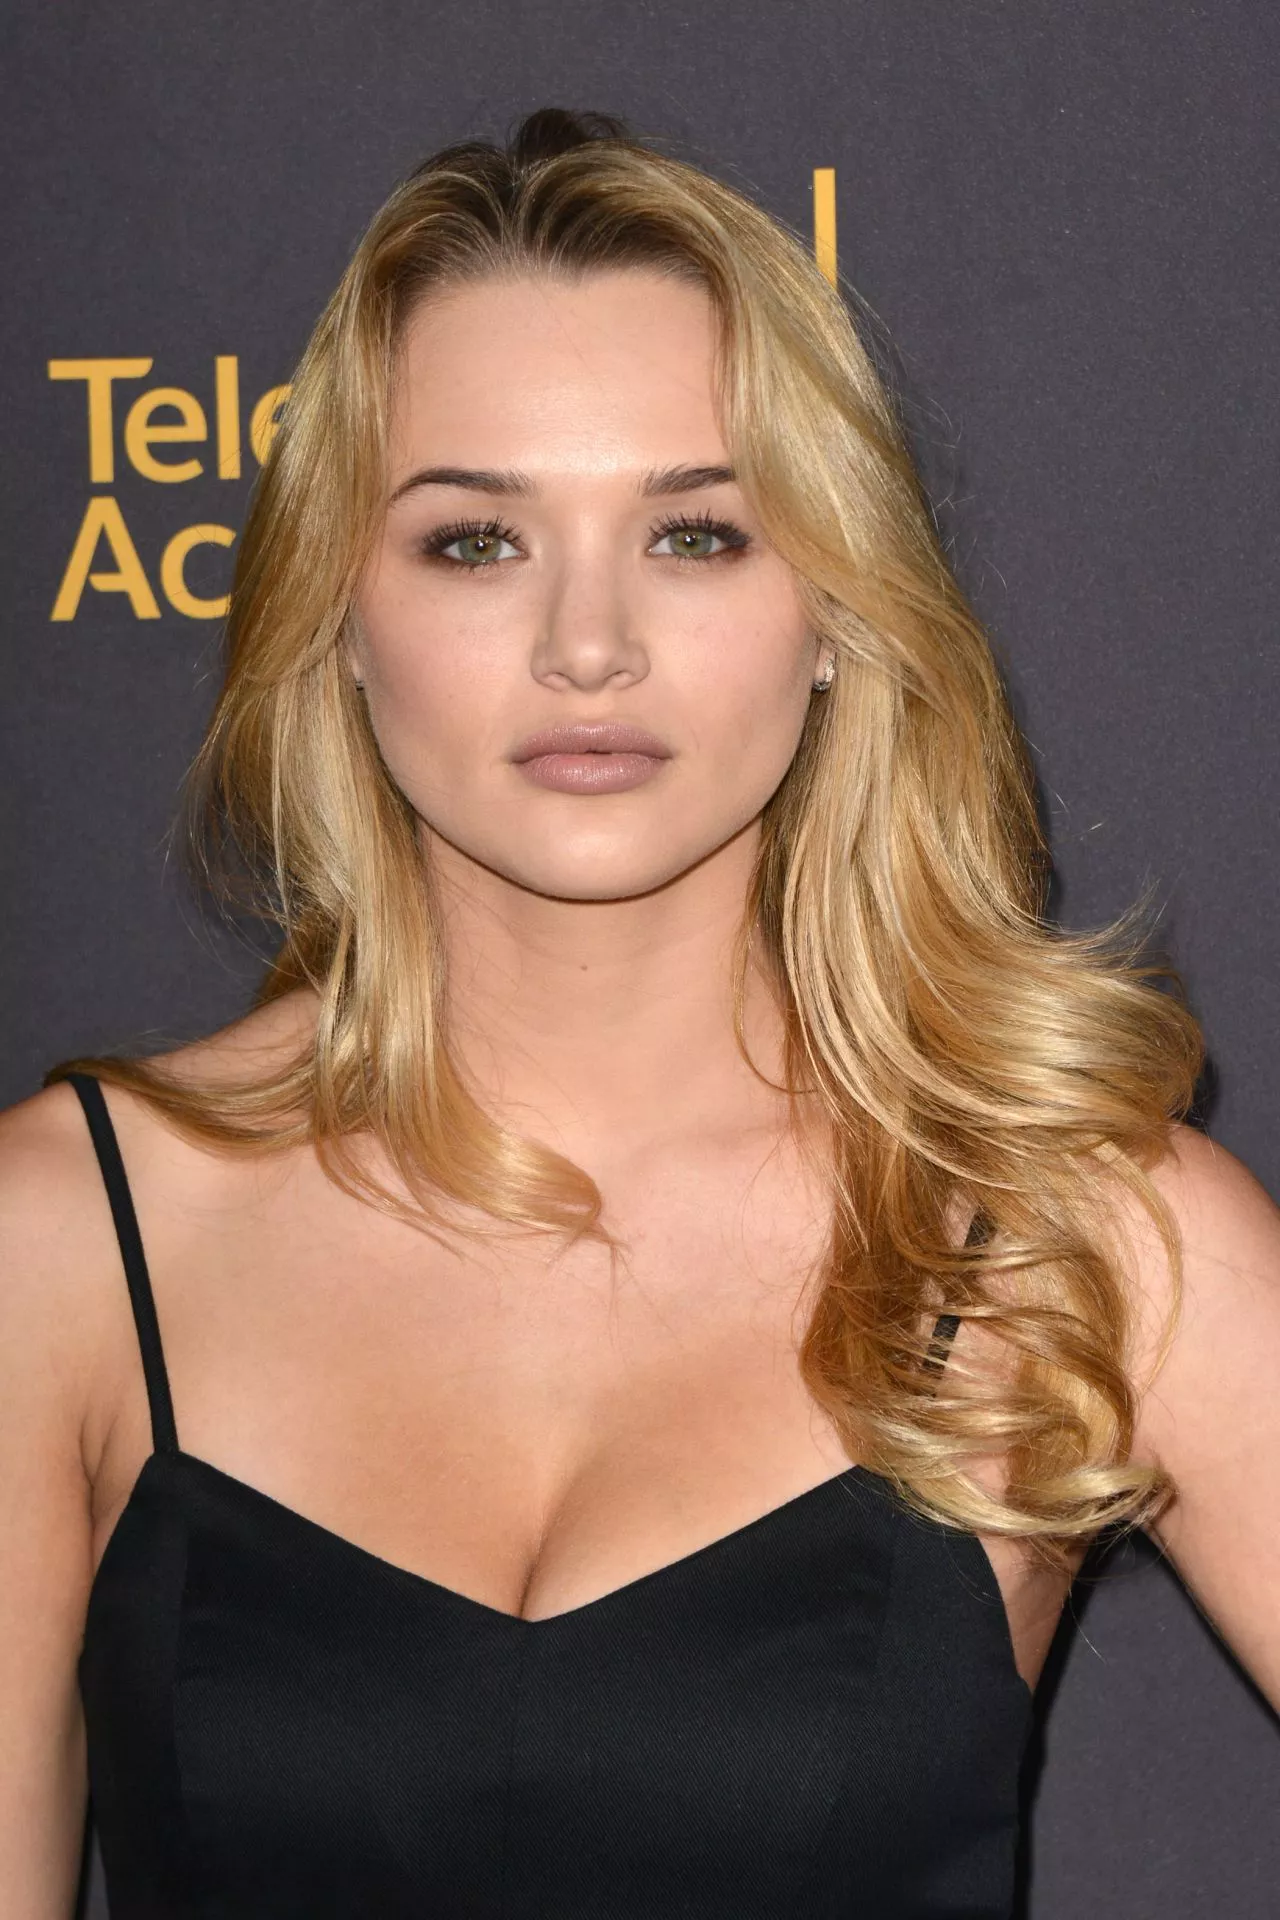 51 Nude Photos Of Hunter King Show Her As A Skilled Performer